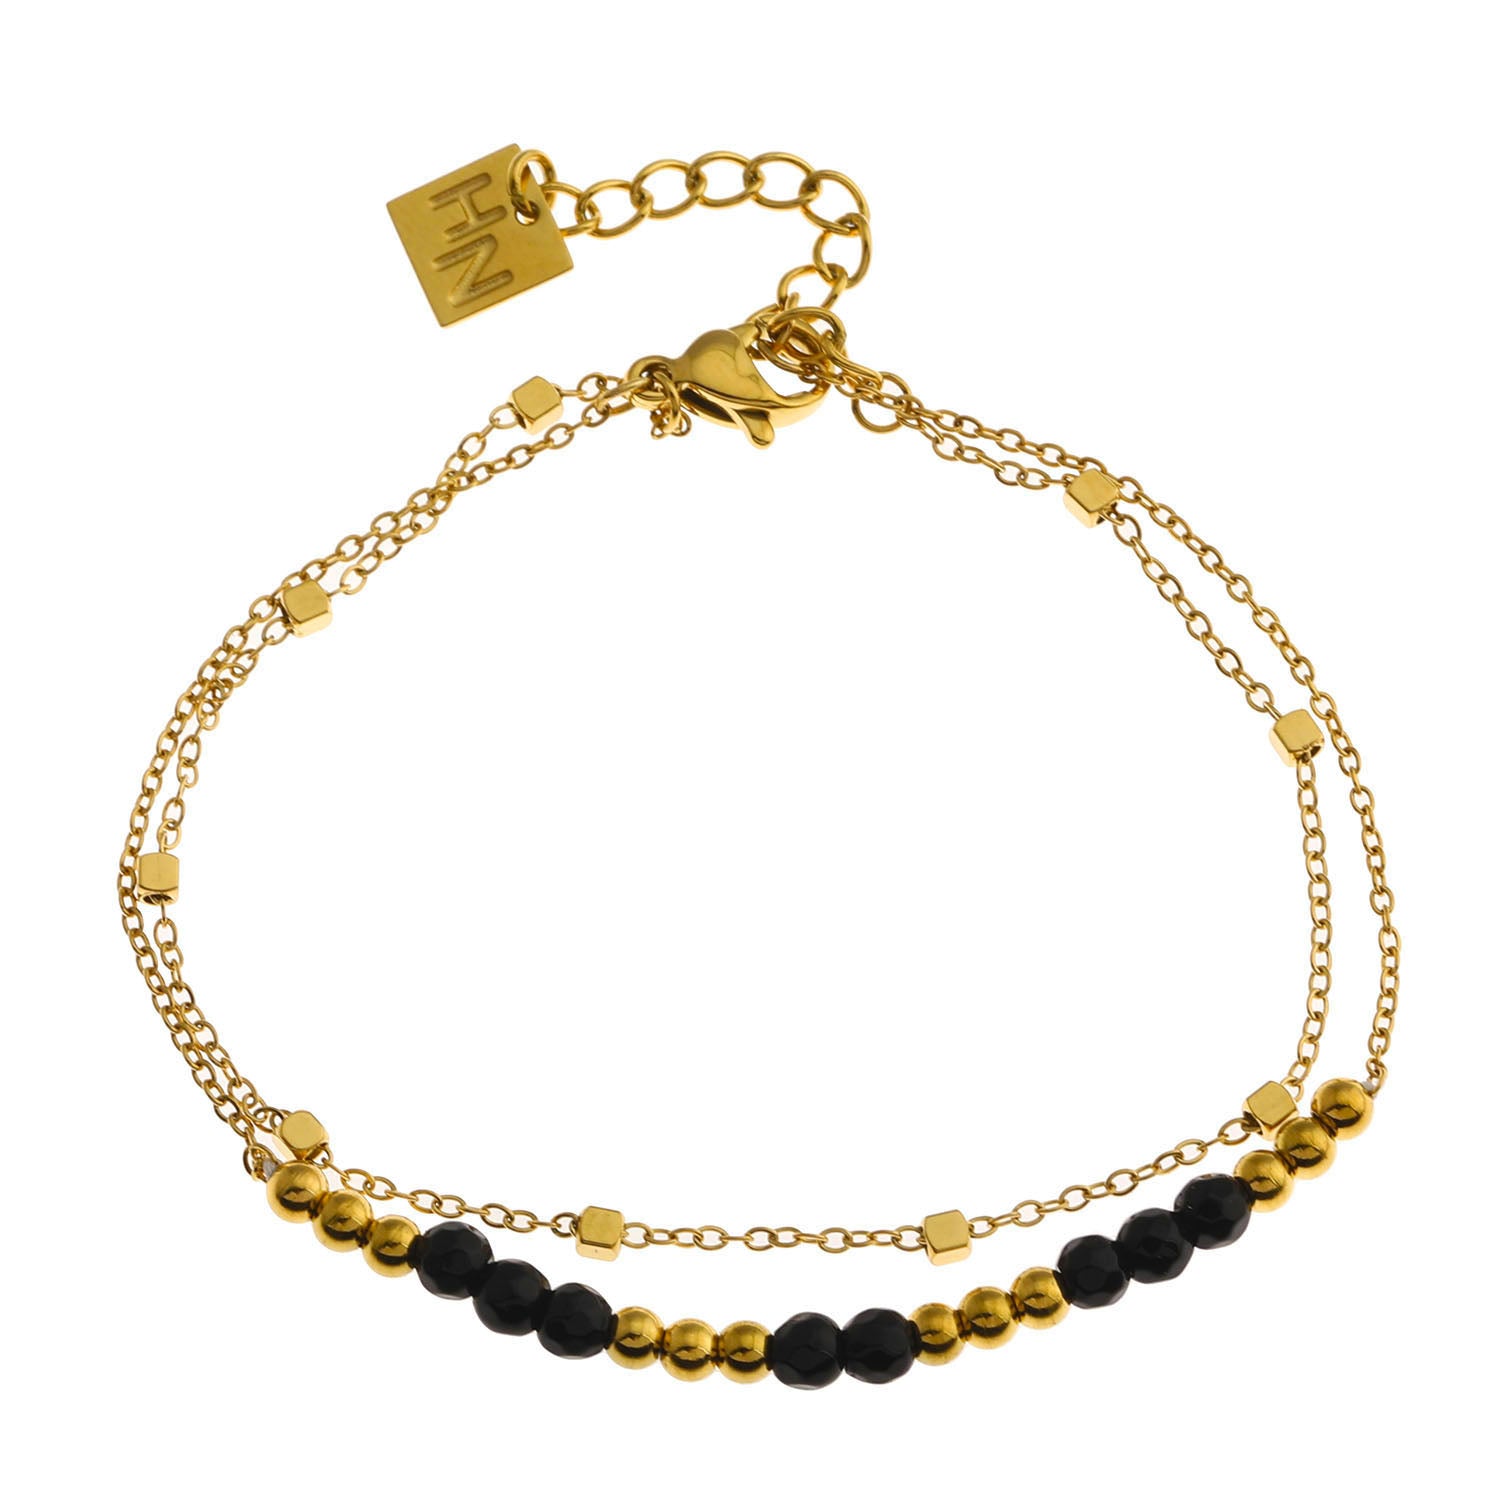 HILDA Two-in-One Square Beads & Round Beads in Black & Gold Bracelet.